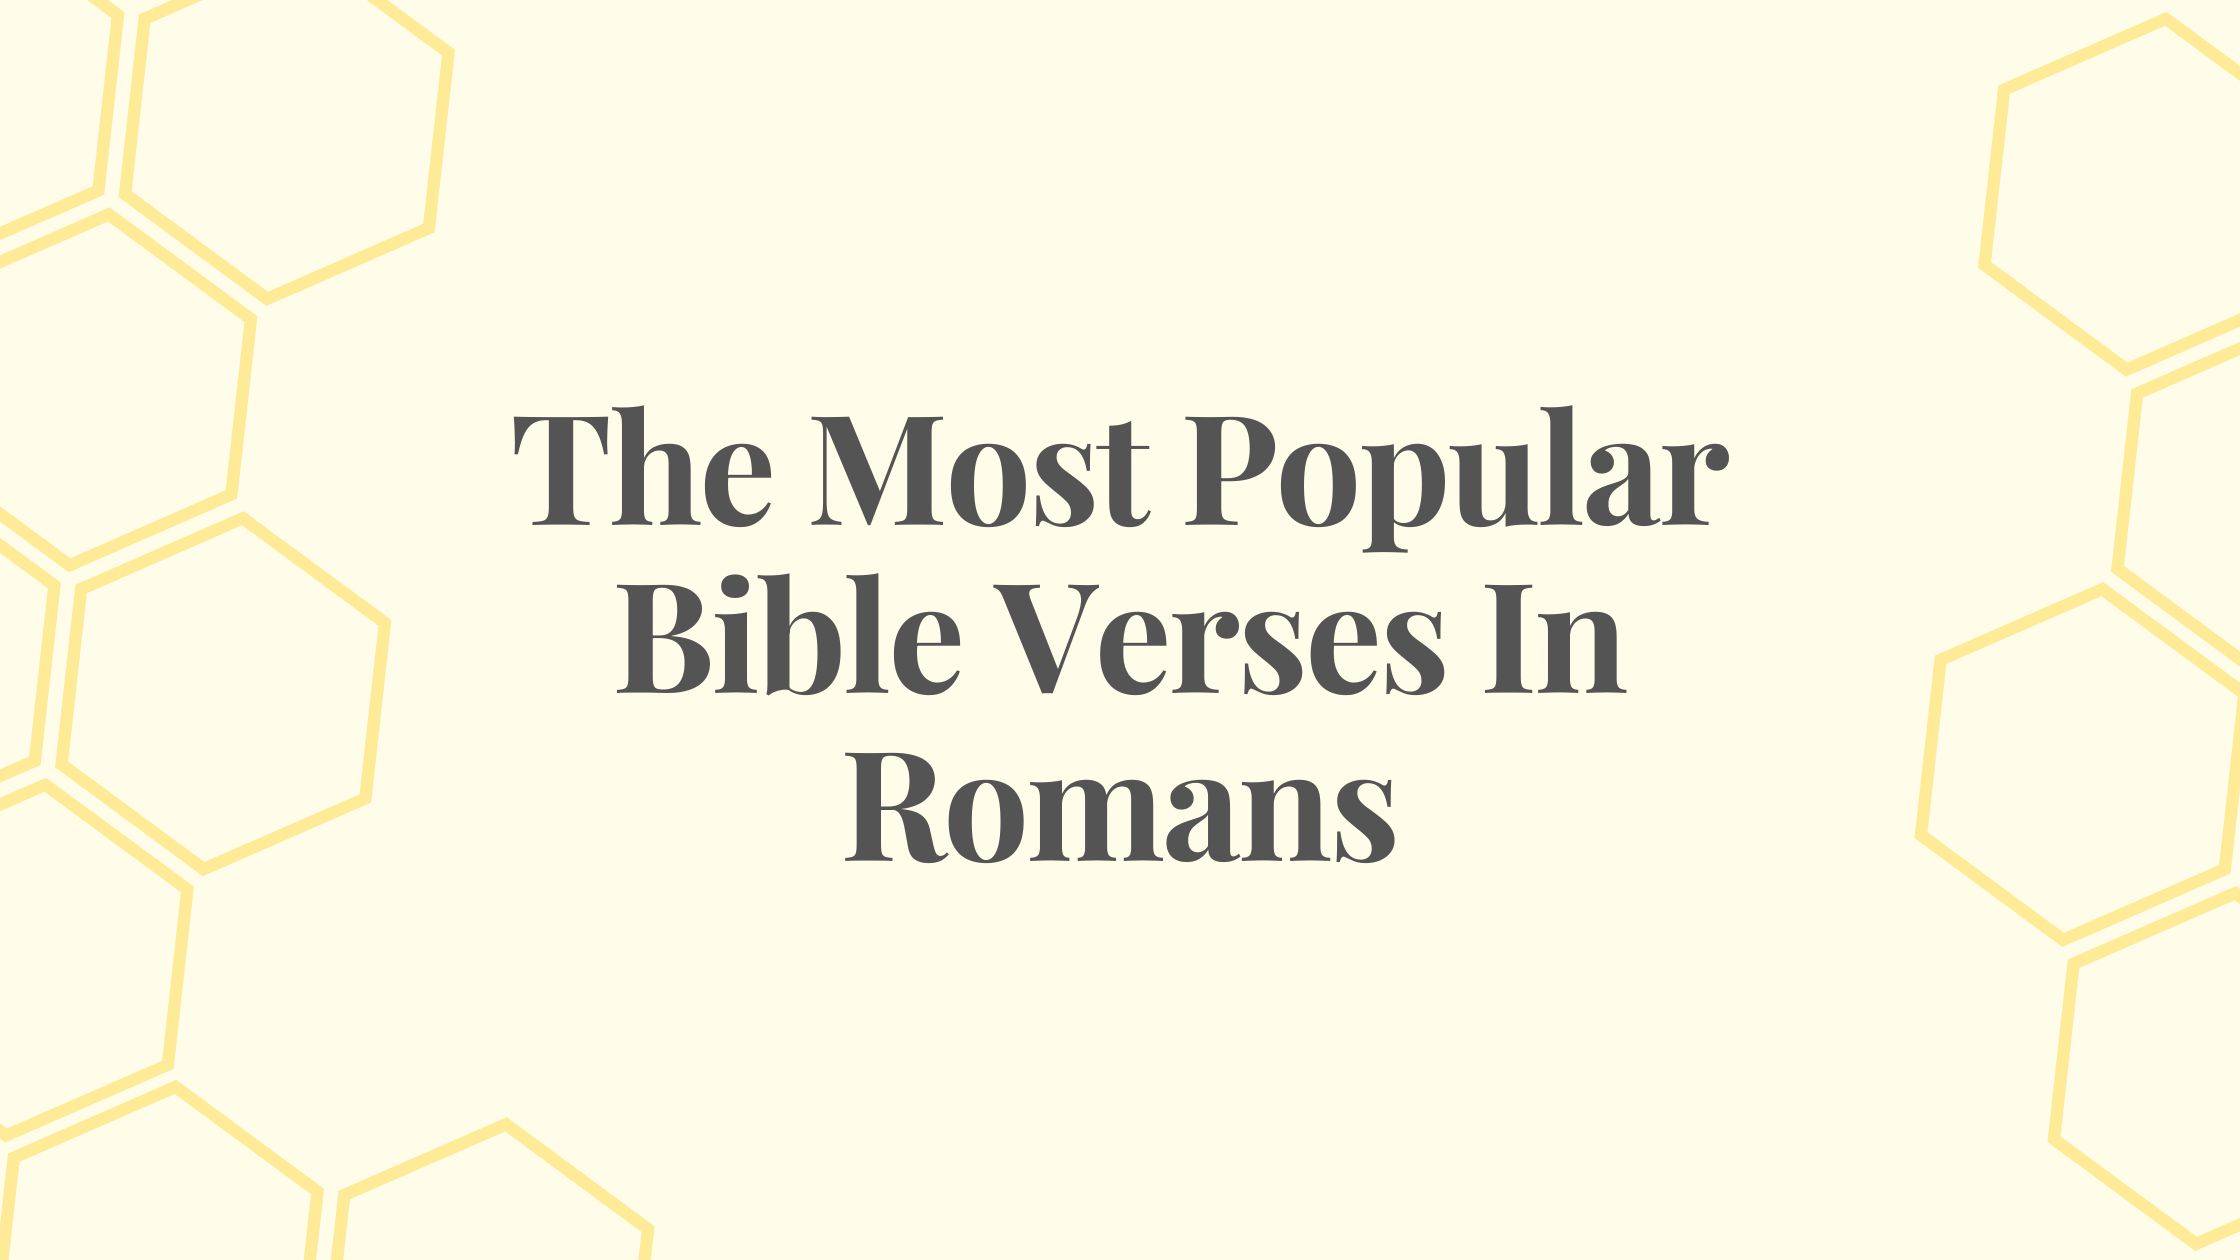 The Most Popular Bible Verses In Romans